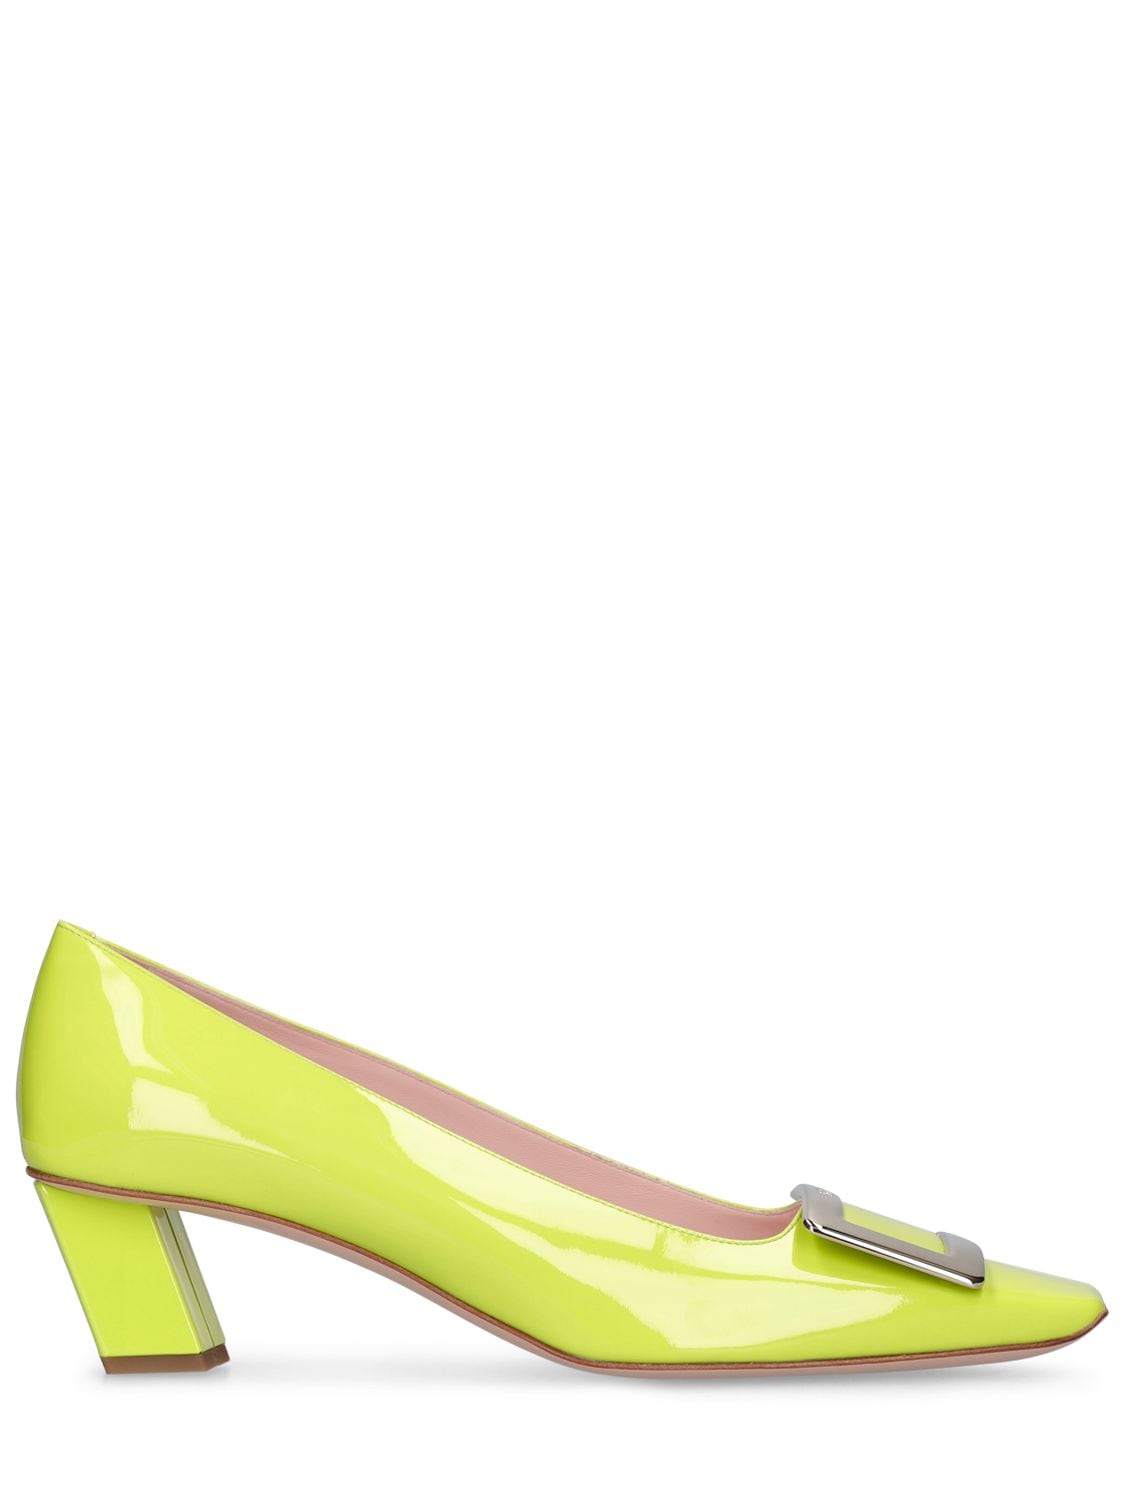 Roger Vivier 45mm Belle Vivier Patent Leather Pumps In Yellow